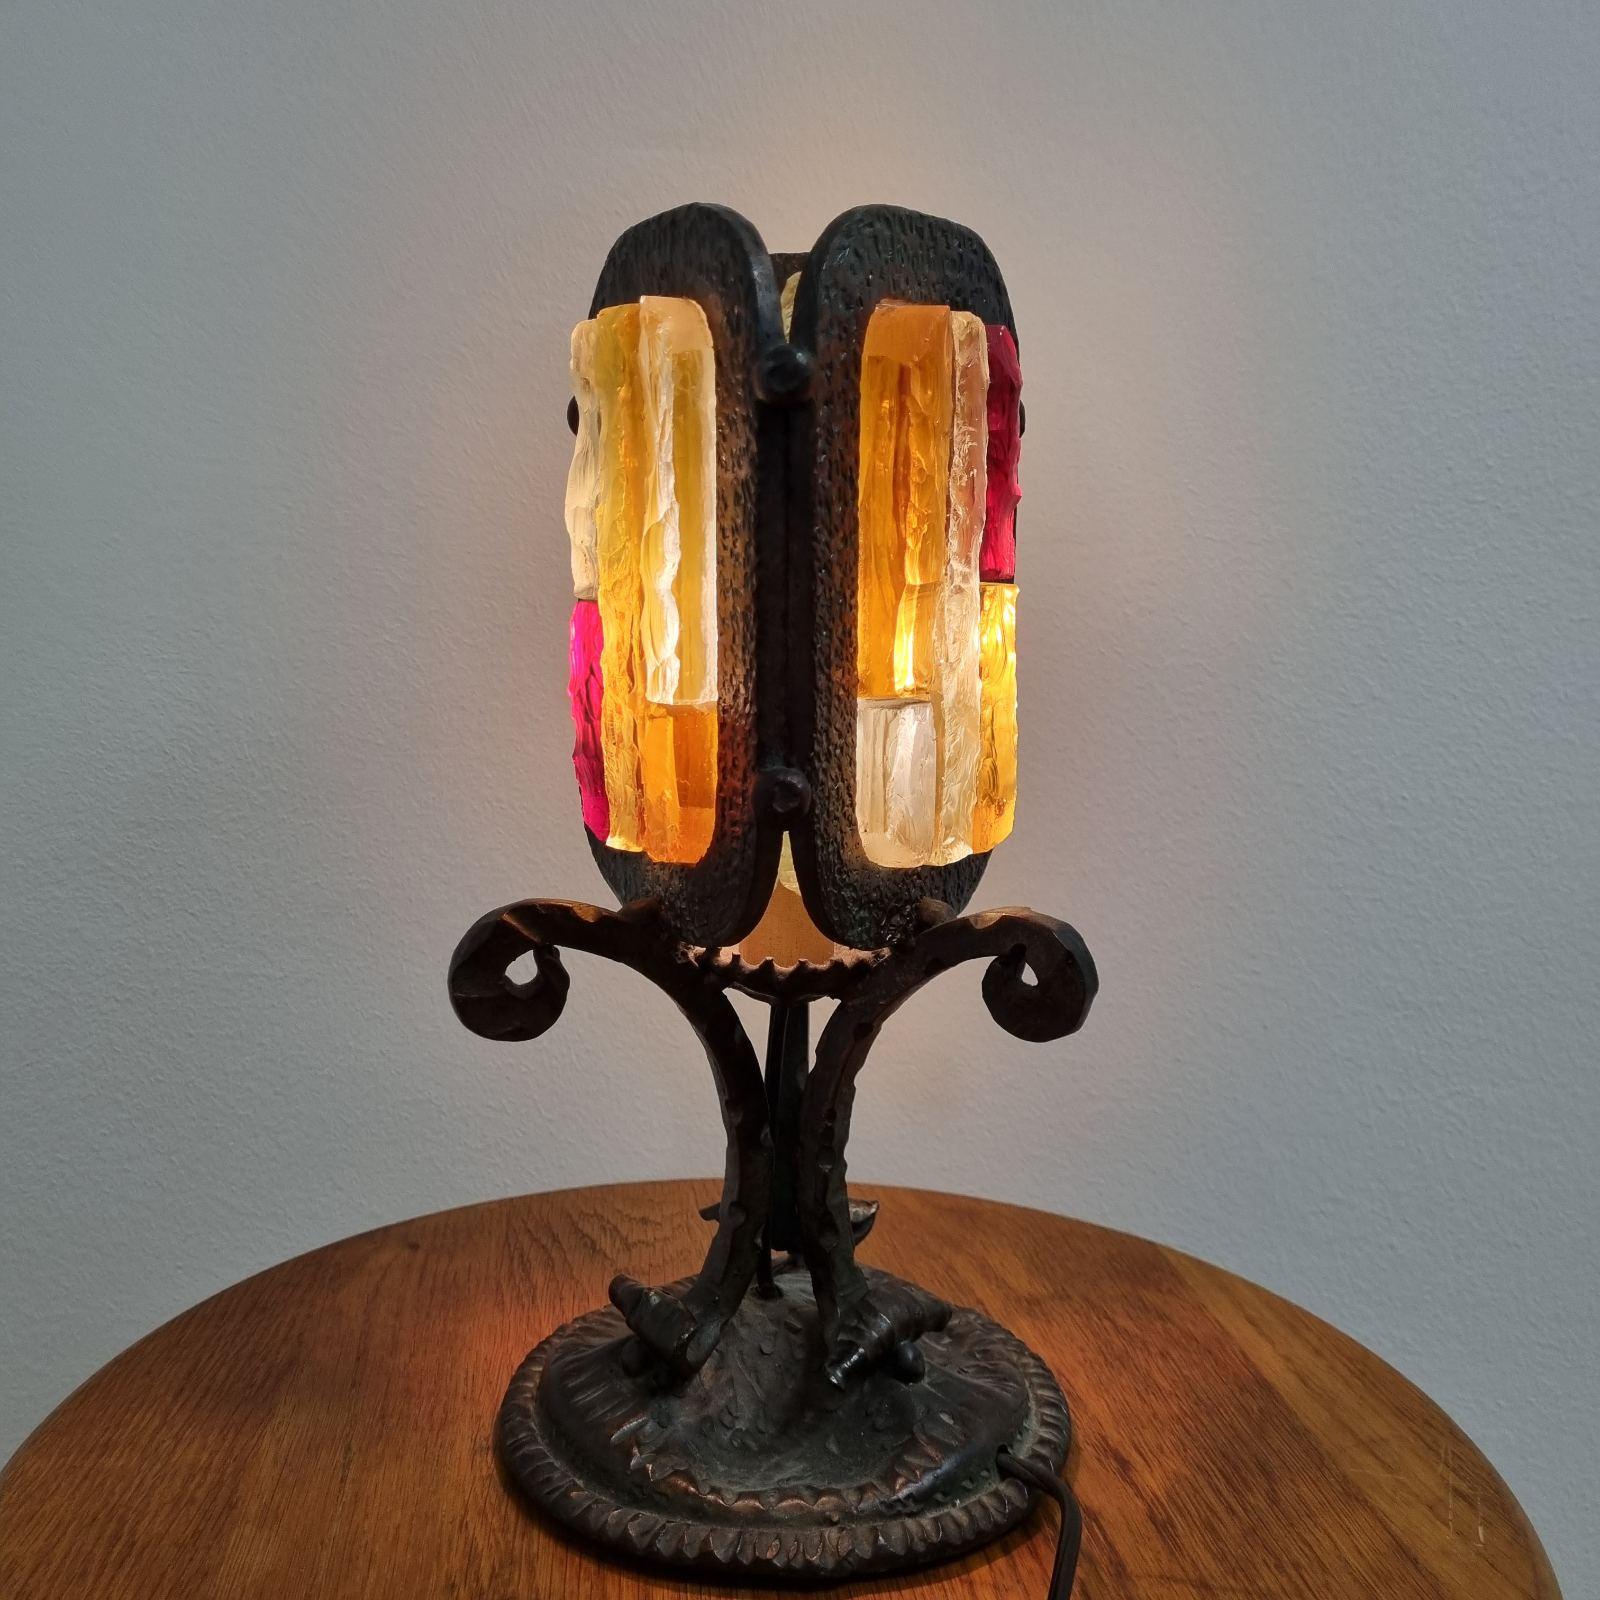 Glass Italian Brutalist Table Lamp by Longobard, Italy 60s